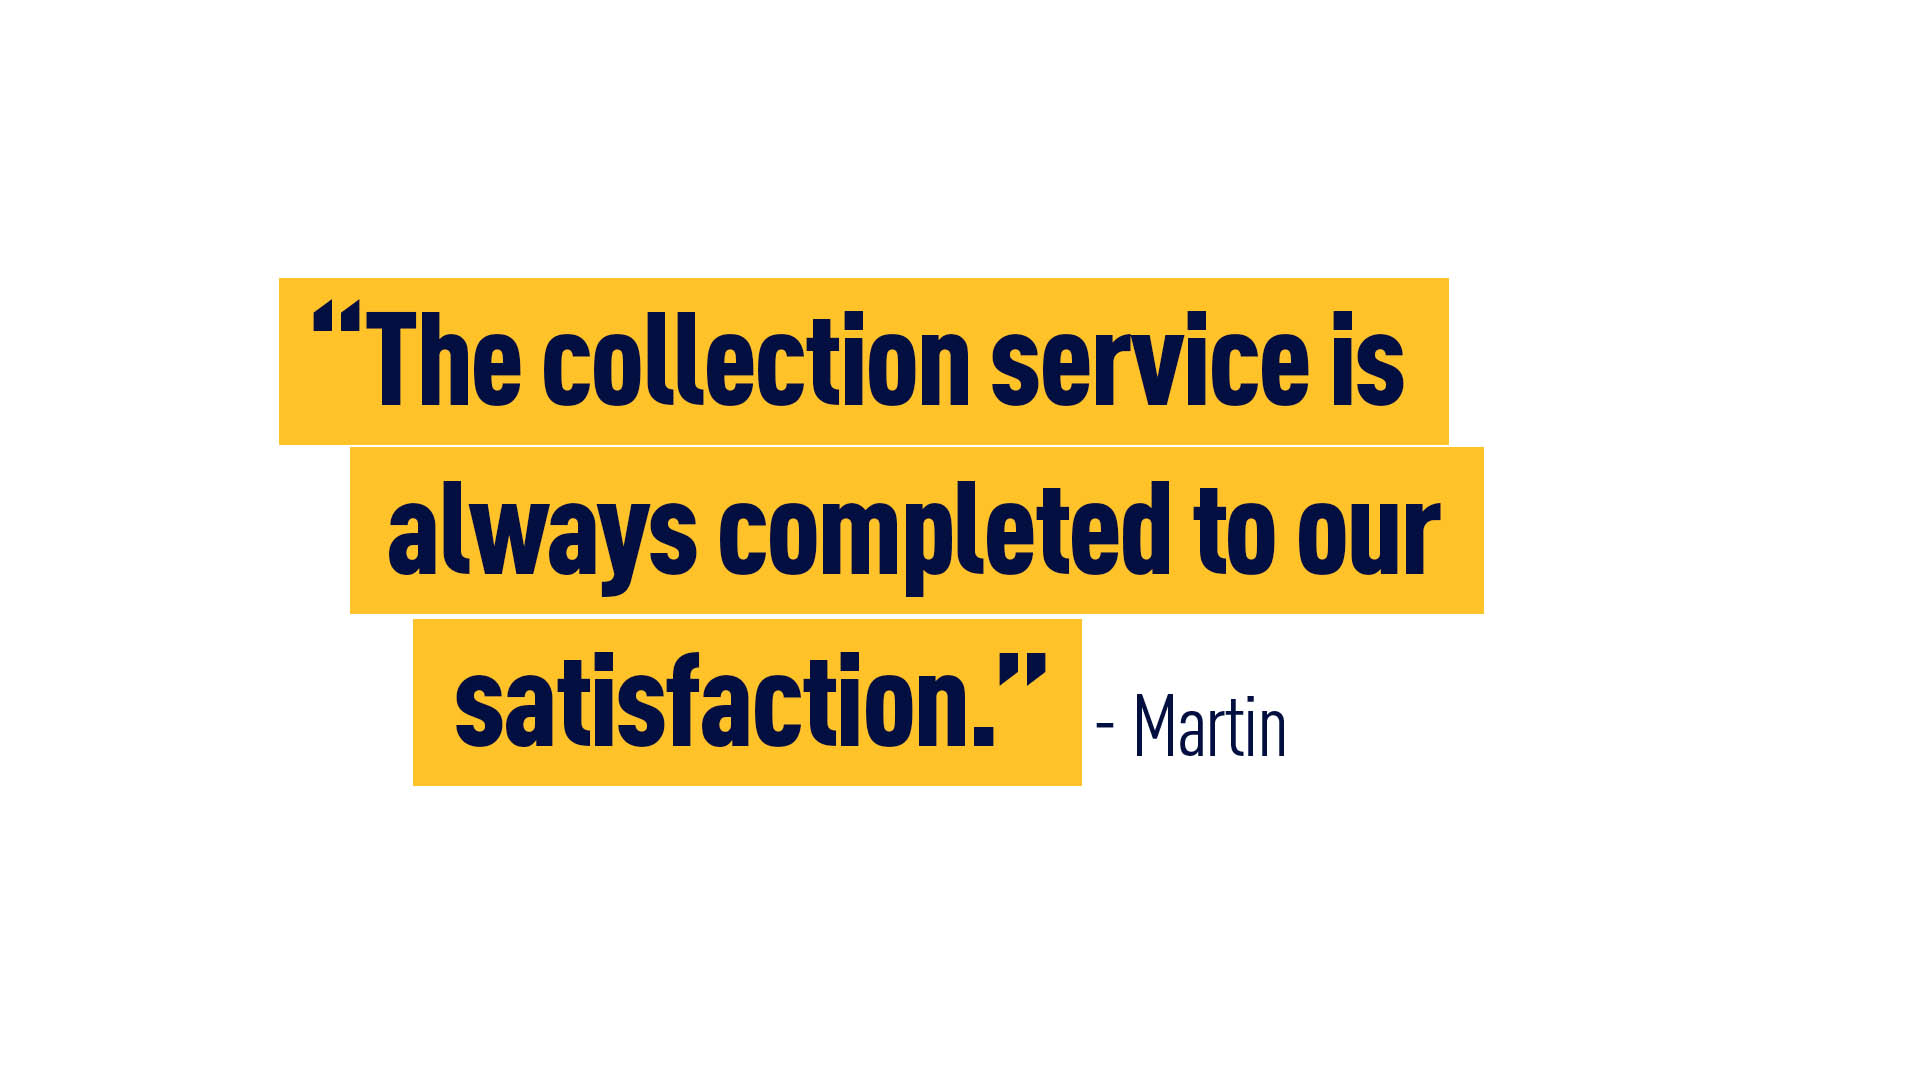 “The collection service is always completed to our satisfaction.” - Martin